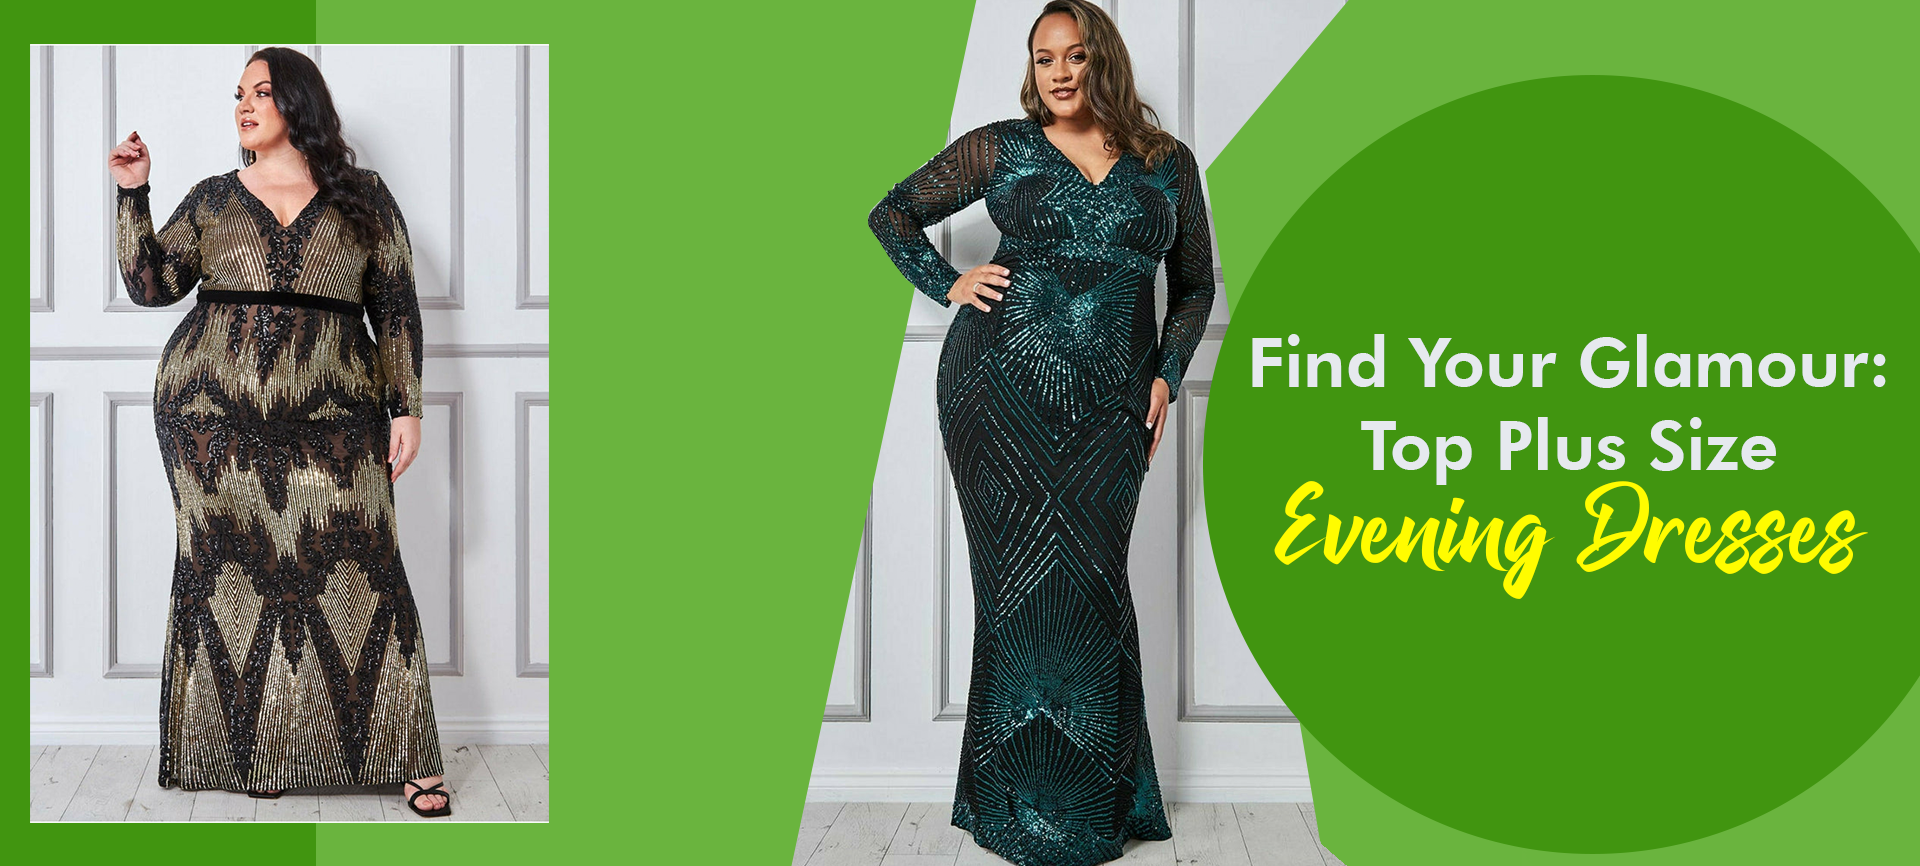 Find Your Glamour: Top Plus Size Evening Dresses